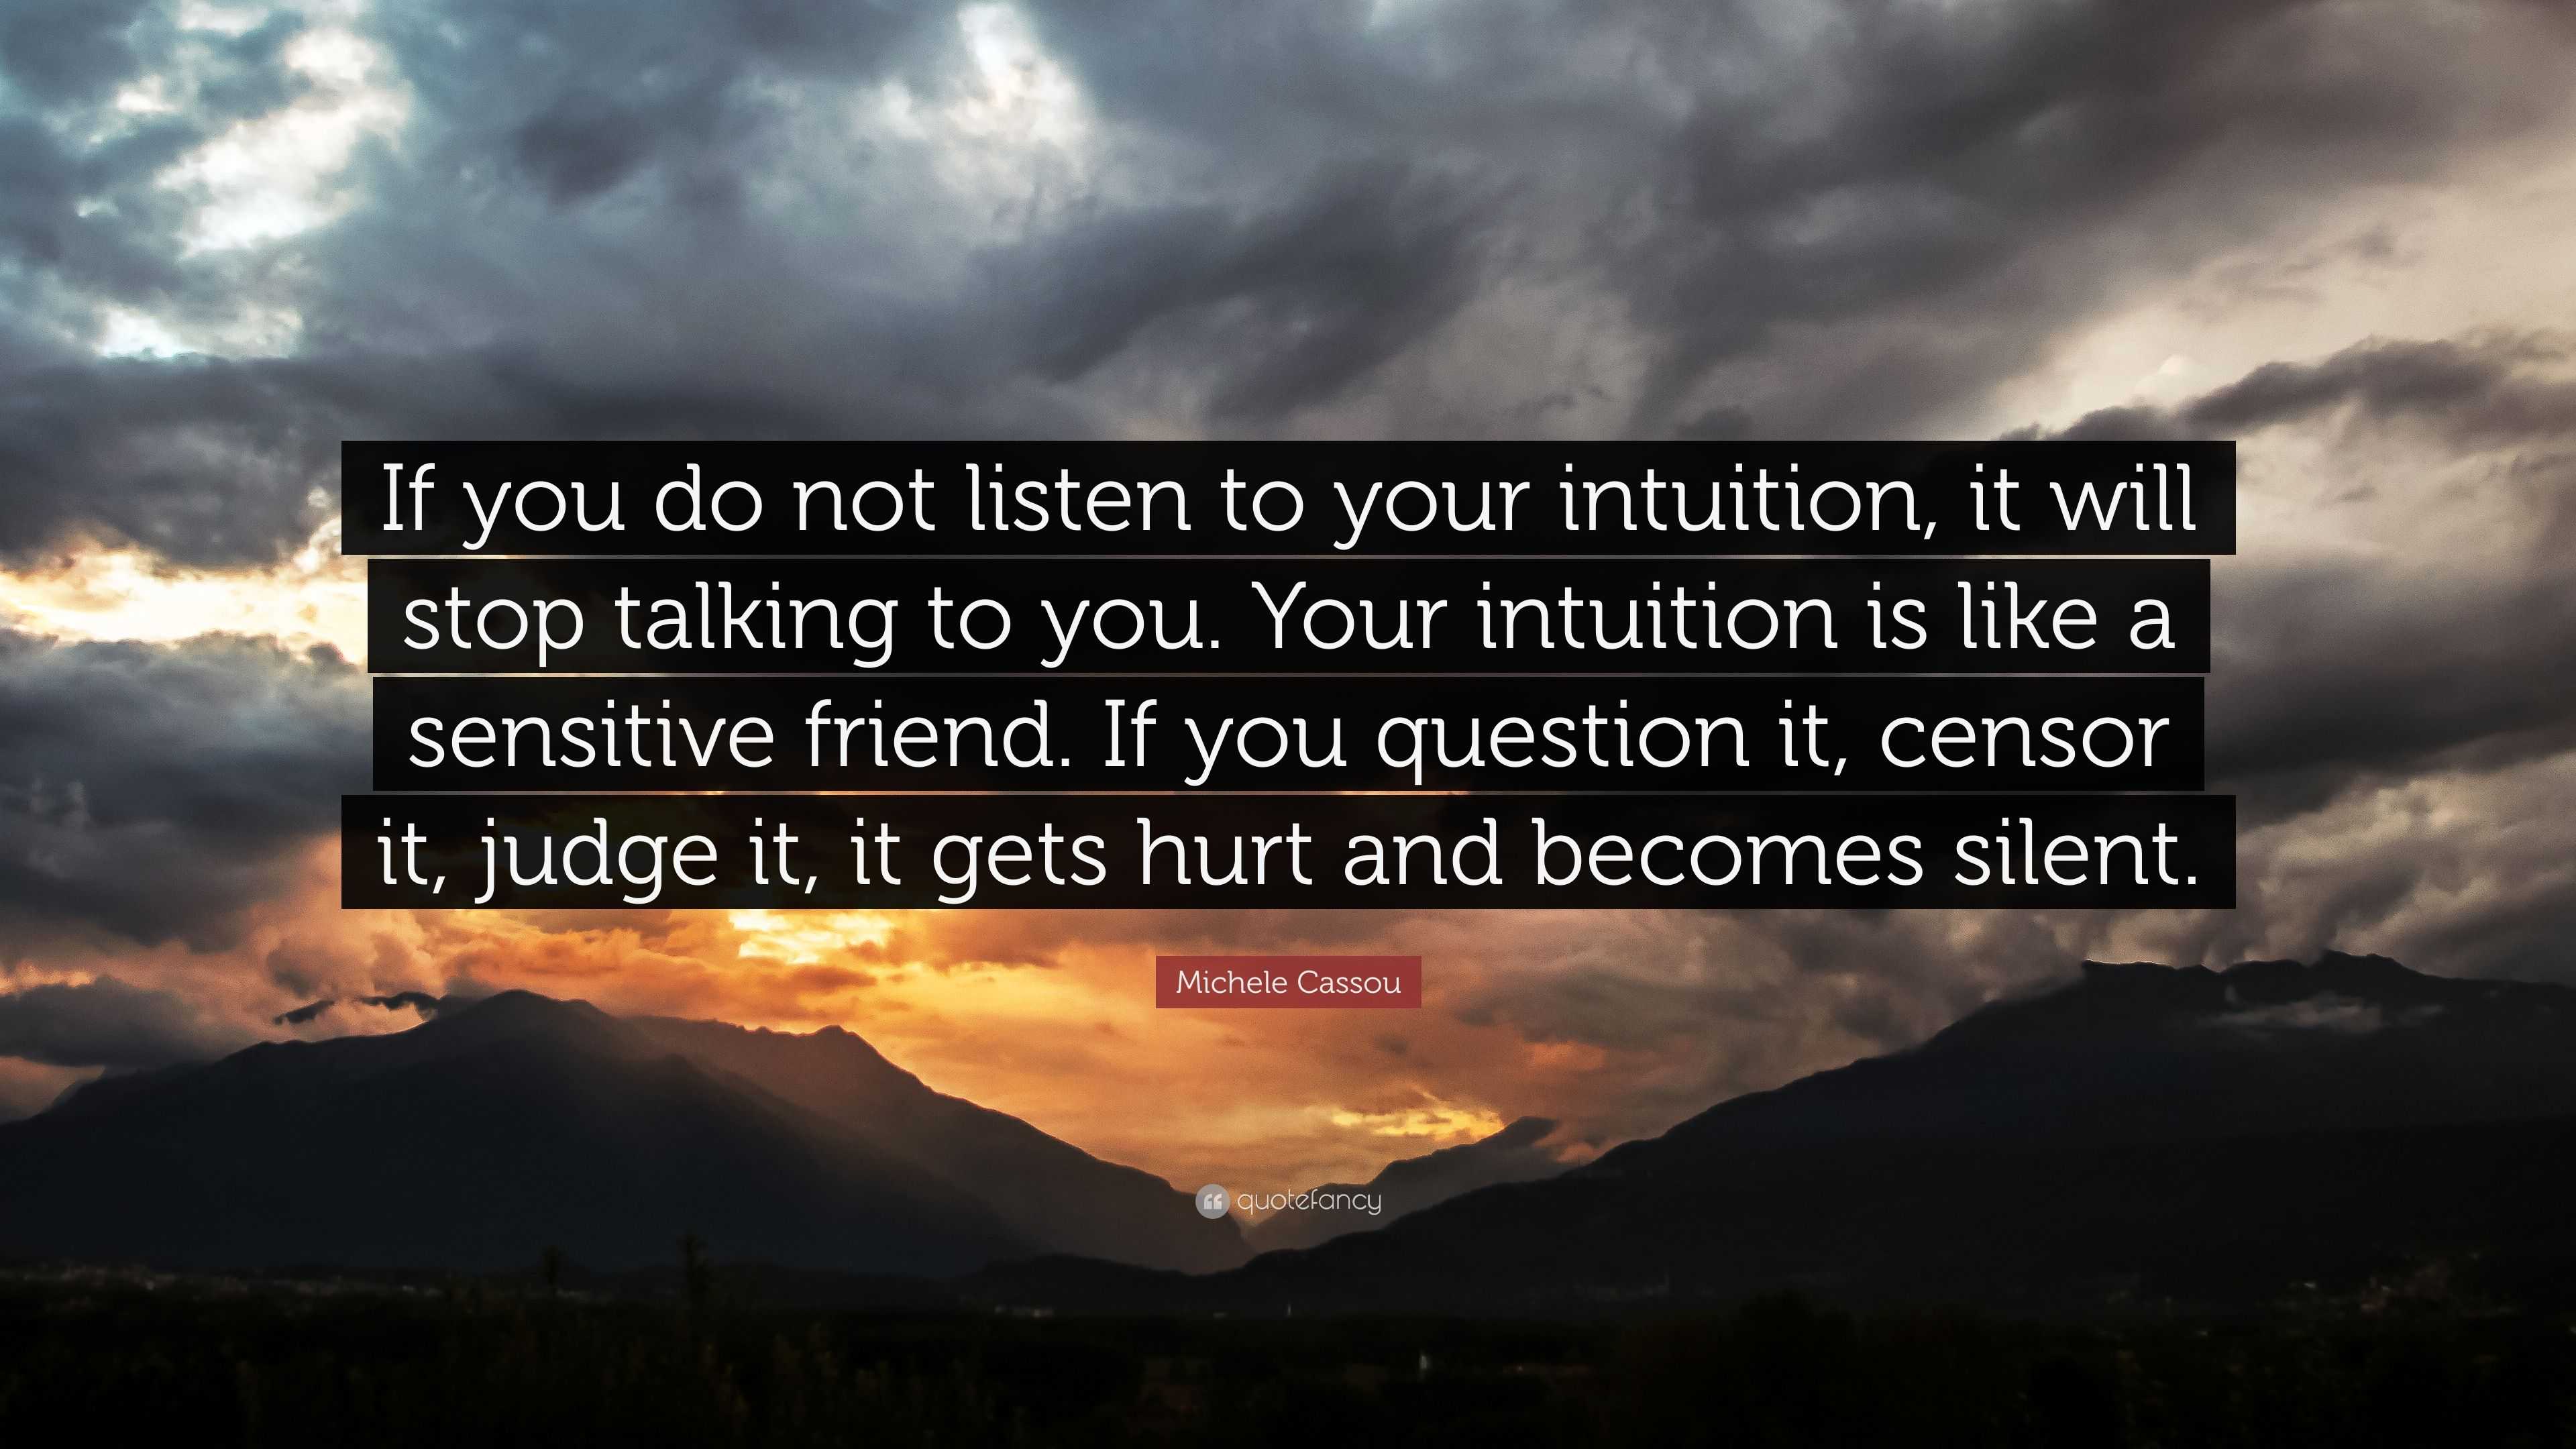 Michele Cassou Quote: “If you do not listen to your intuition, it will ...